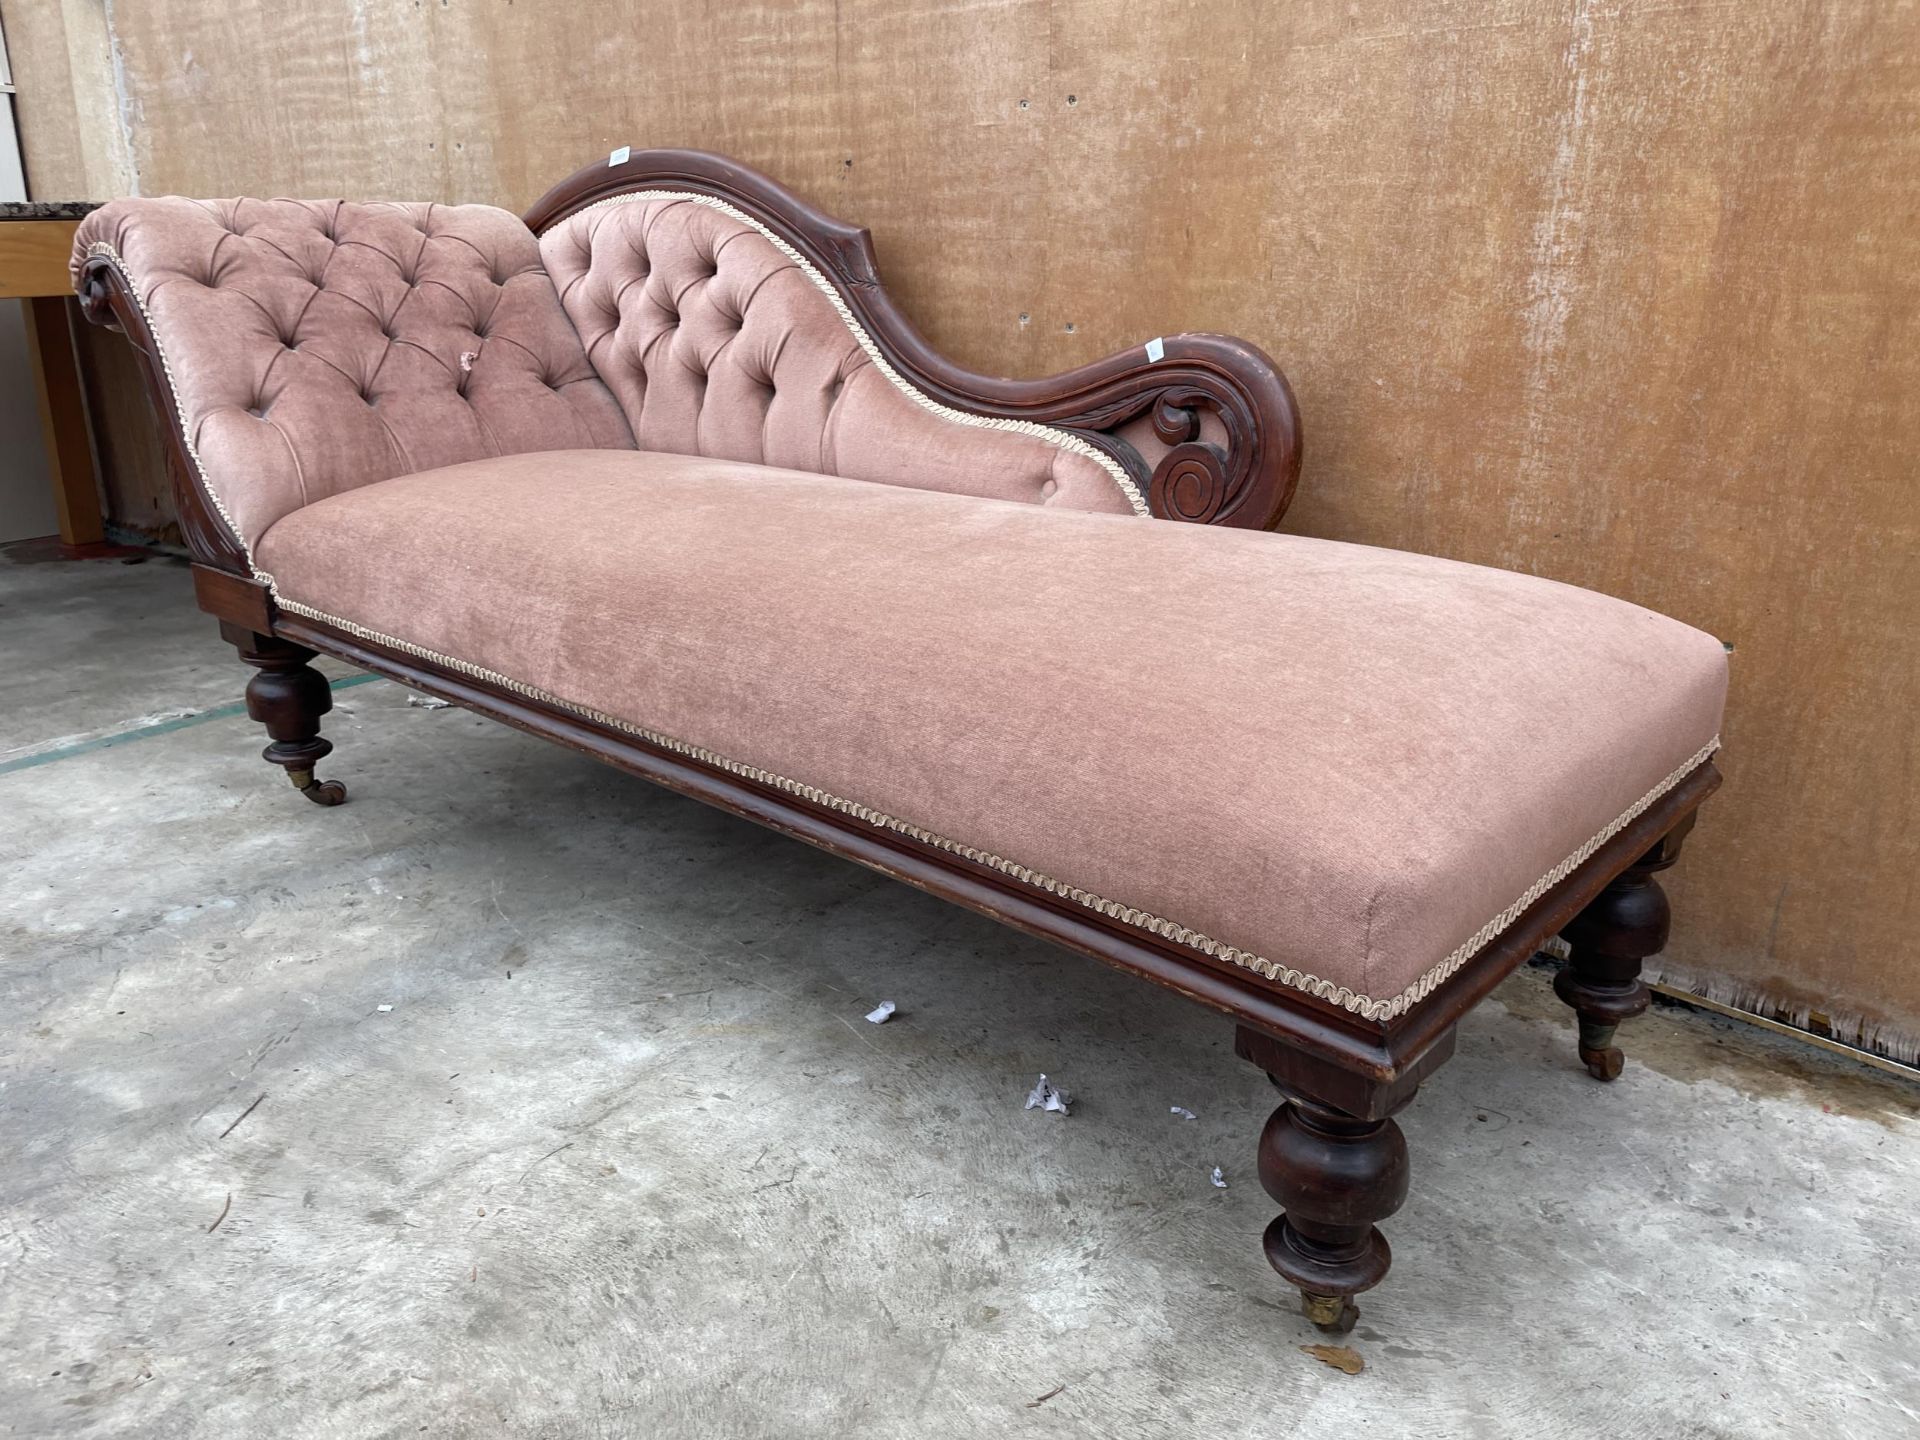 A VICTORIAN BEECH FRAMED CHAISE LONGUE ON TURNED LEGS - Image 2 of 4